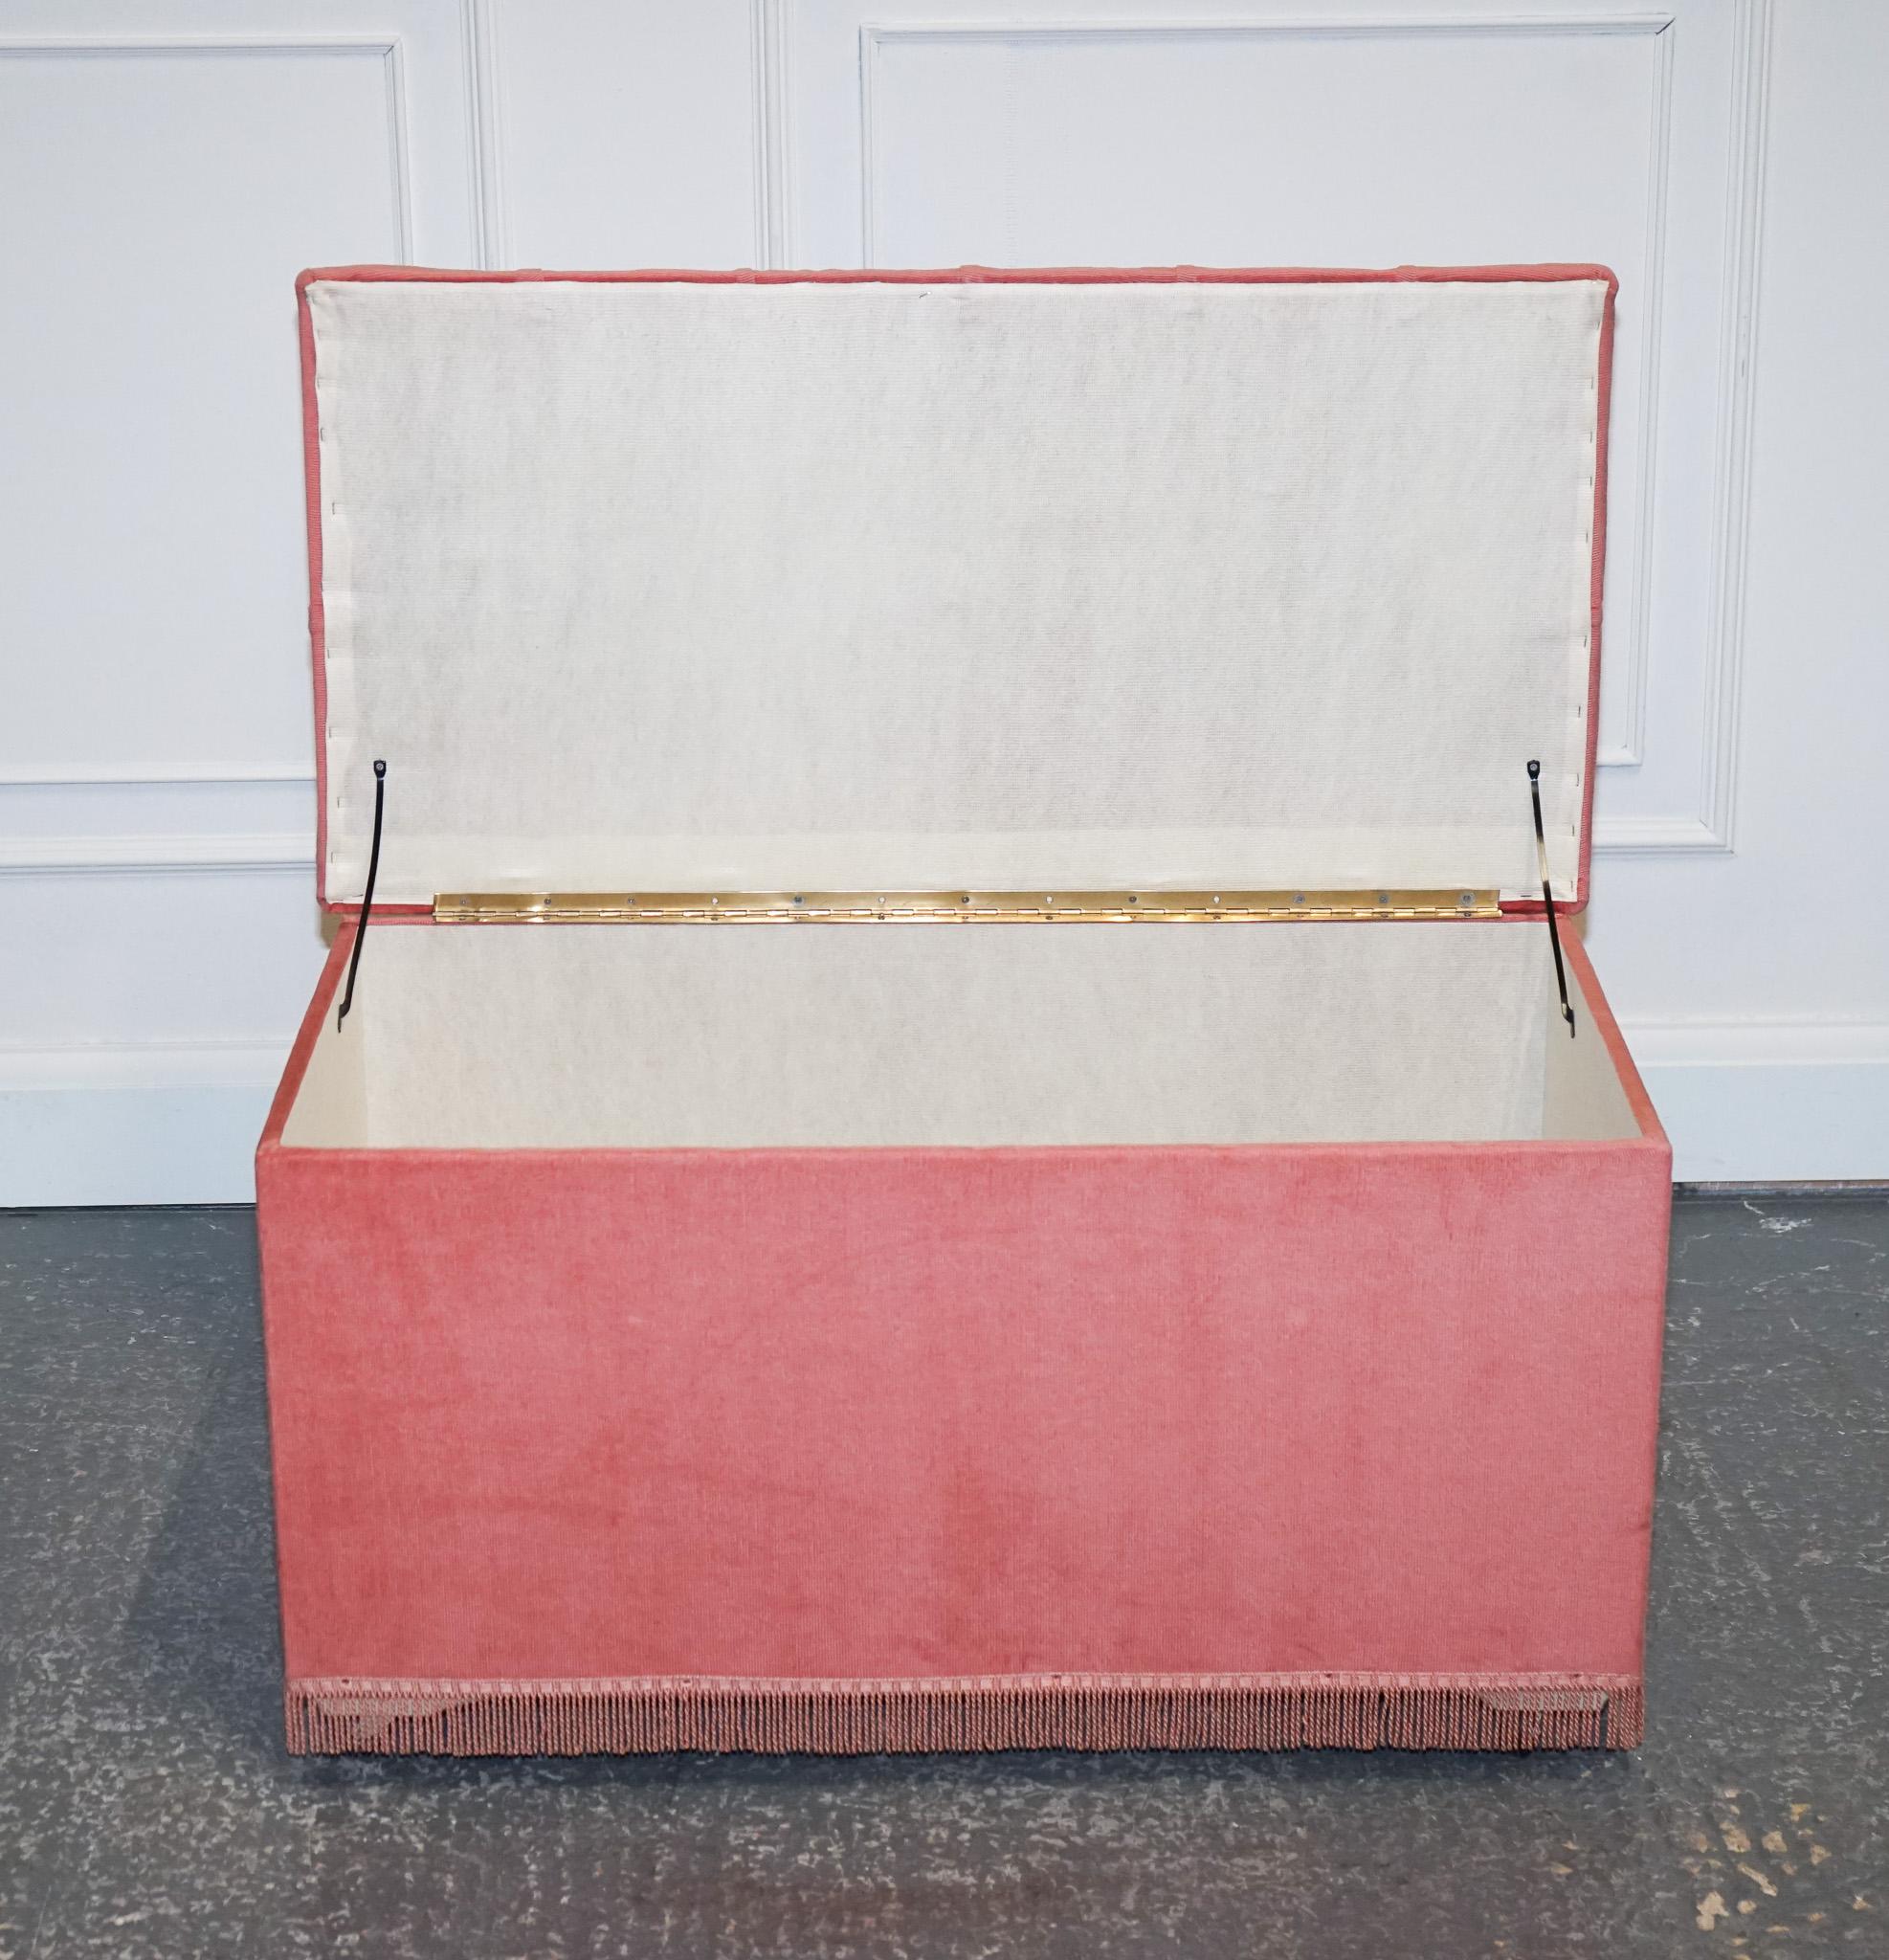 Vintage 1960s Large Tuffed Ottoman Bed End Storage Chest Box Trunk Fringed In Good Condition For Sale In Pulborough, GB